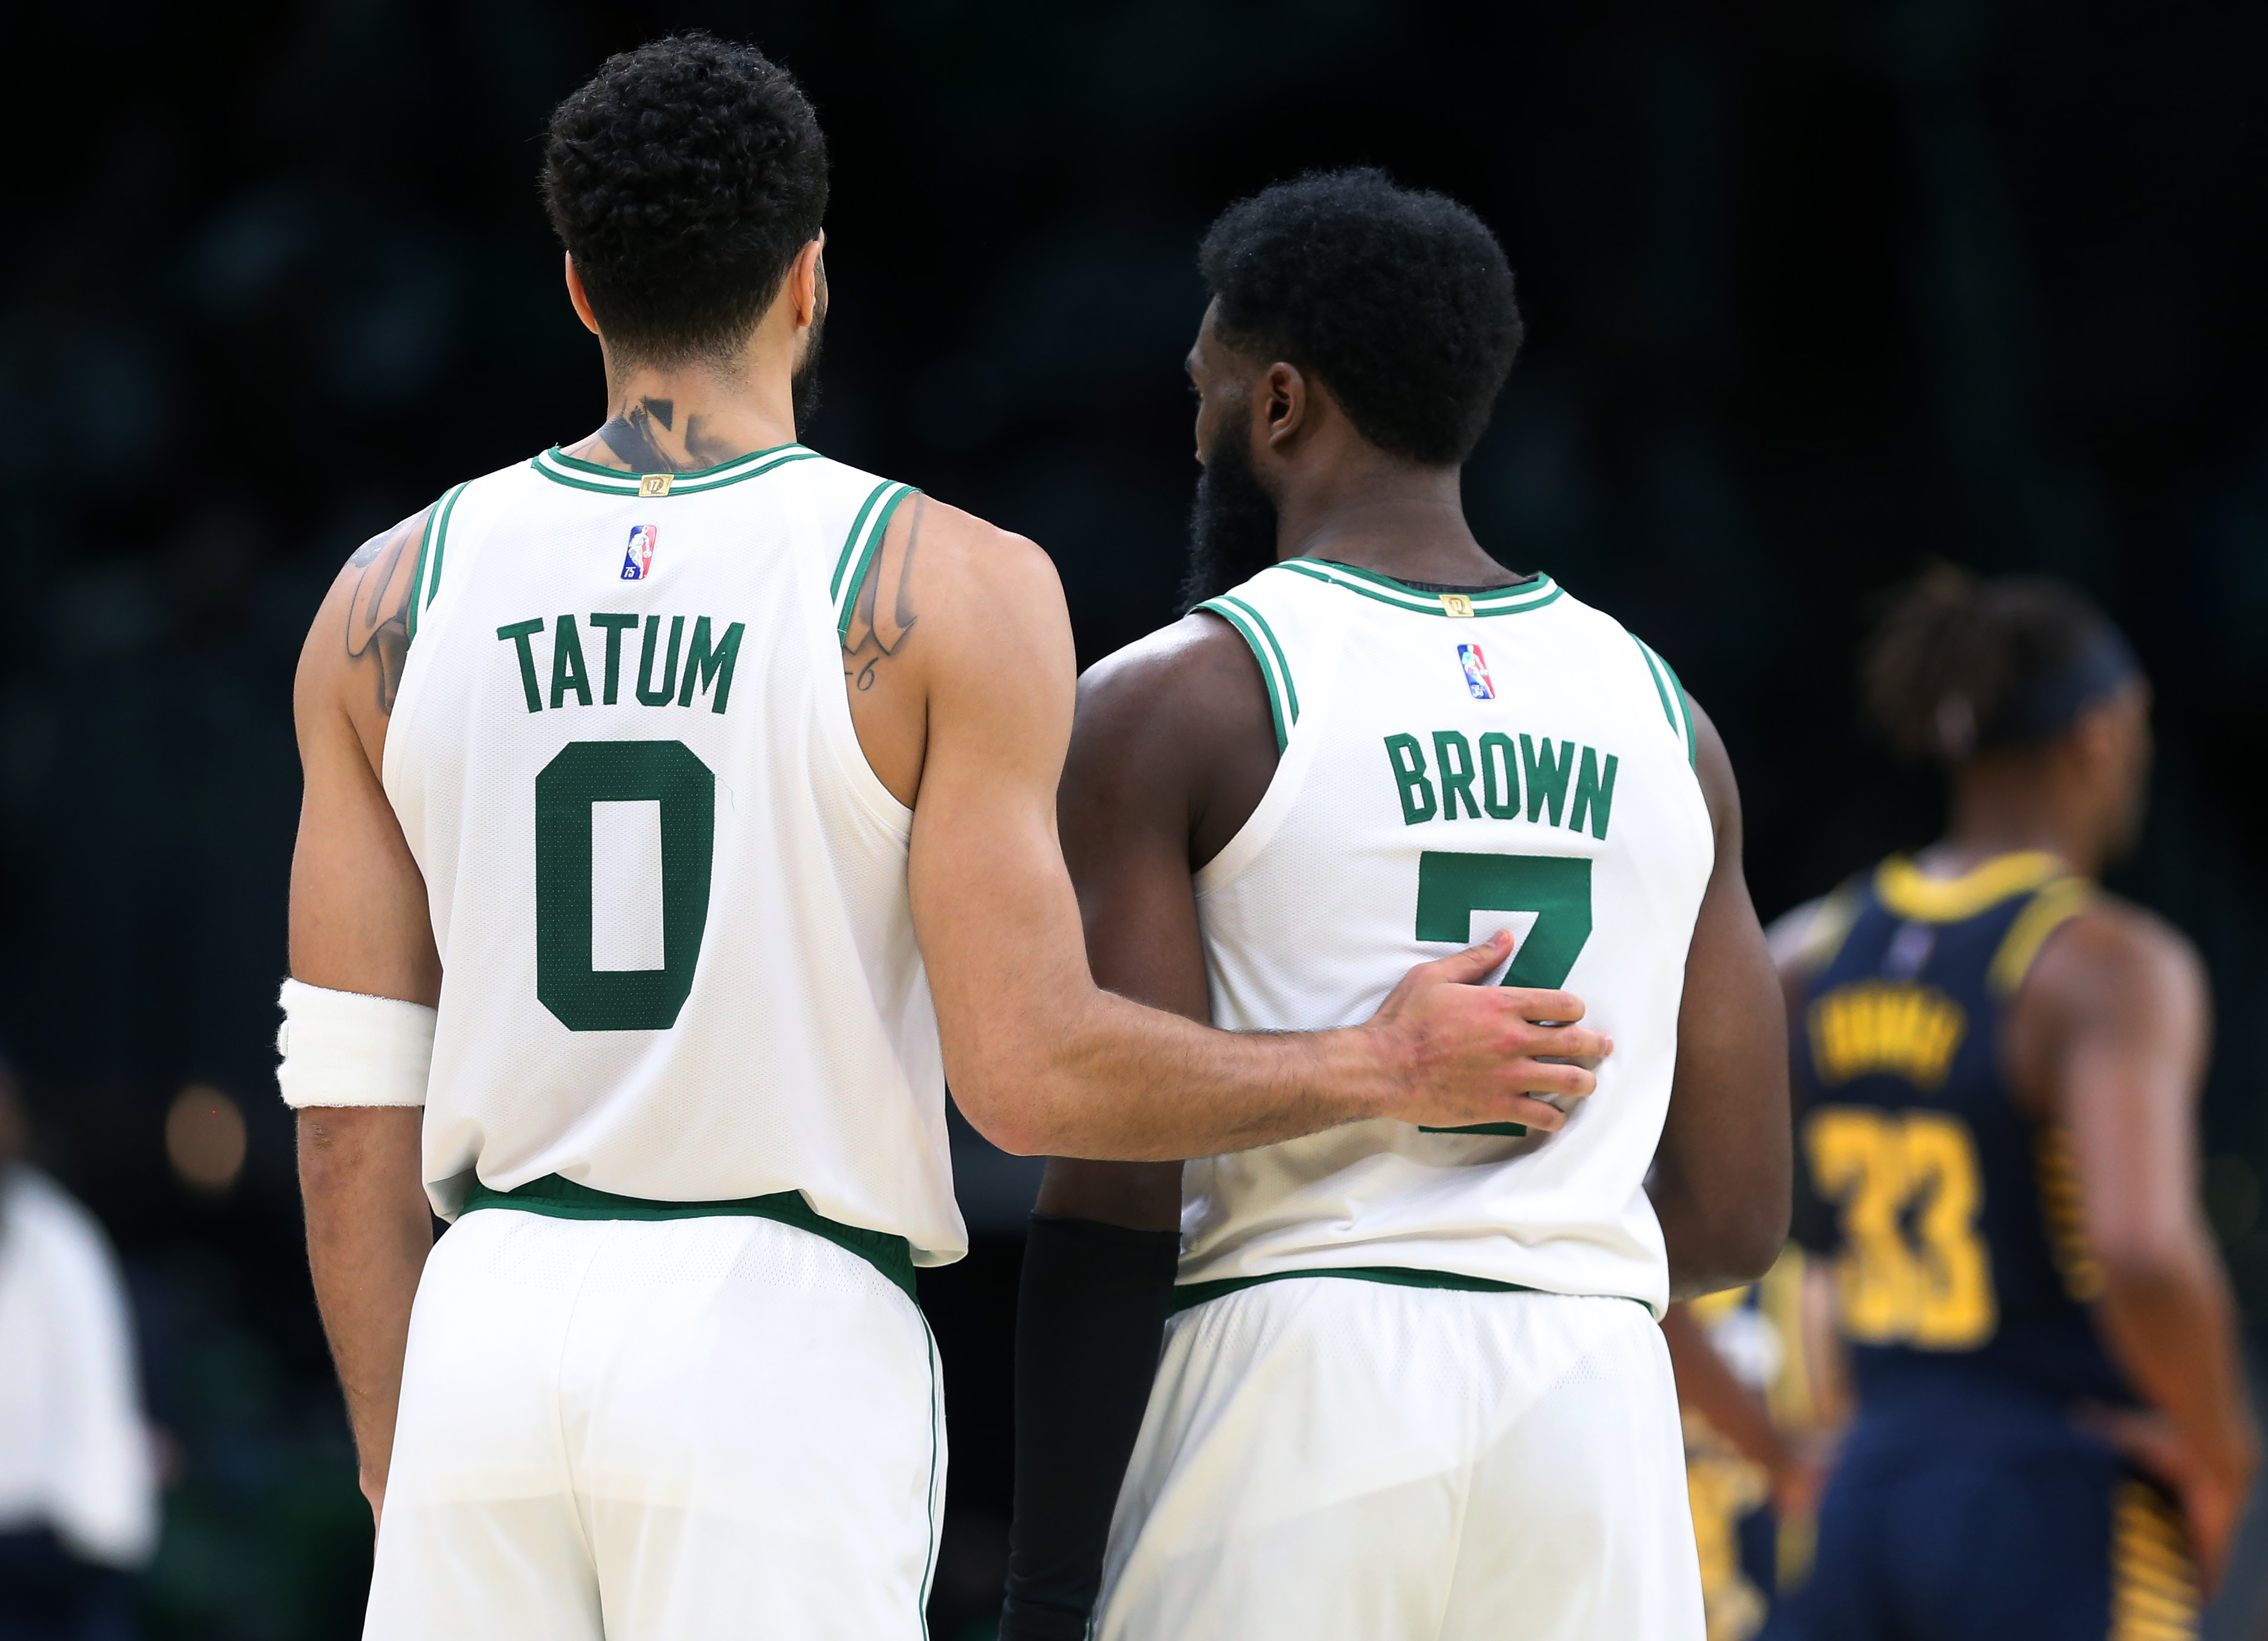 Celtic Jaylen Brown named to the All-NBA second team, which could lead to  record deal - The Boston Globe